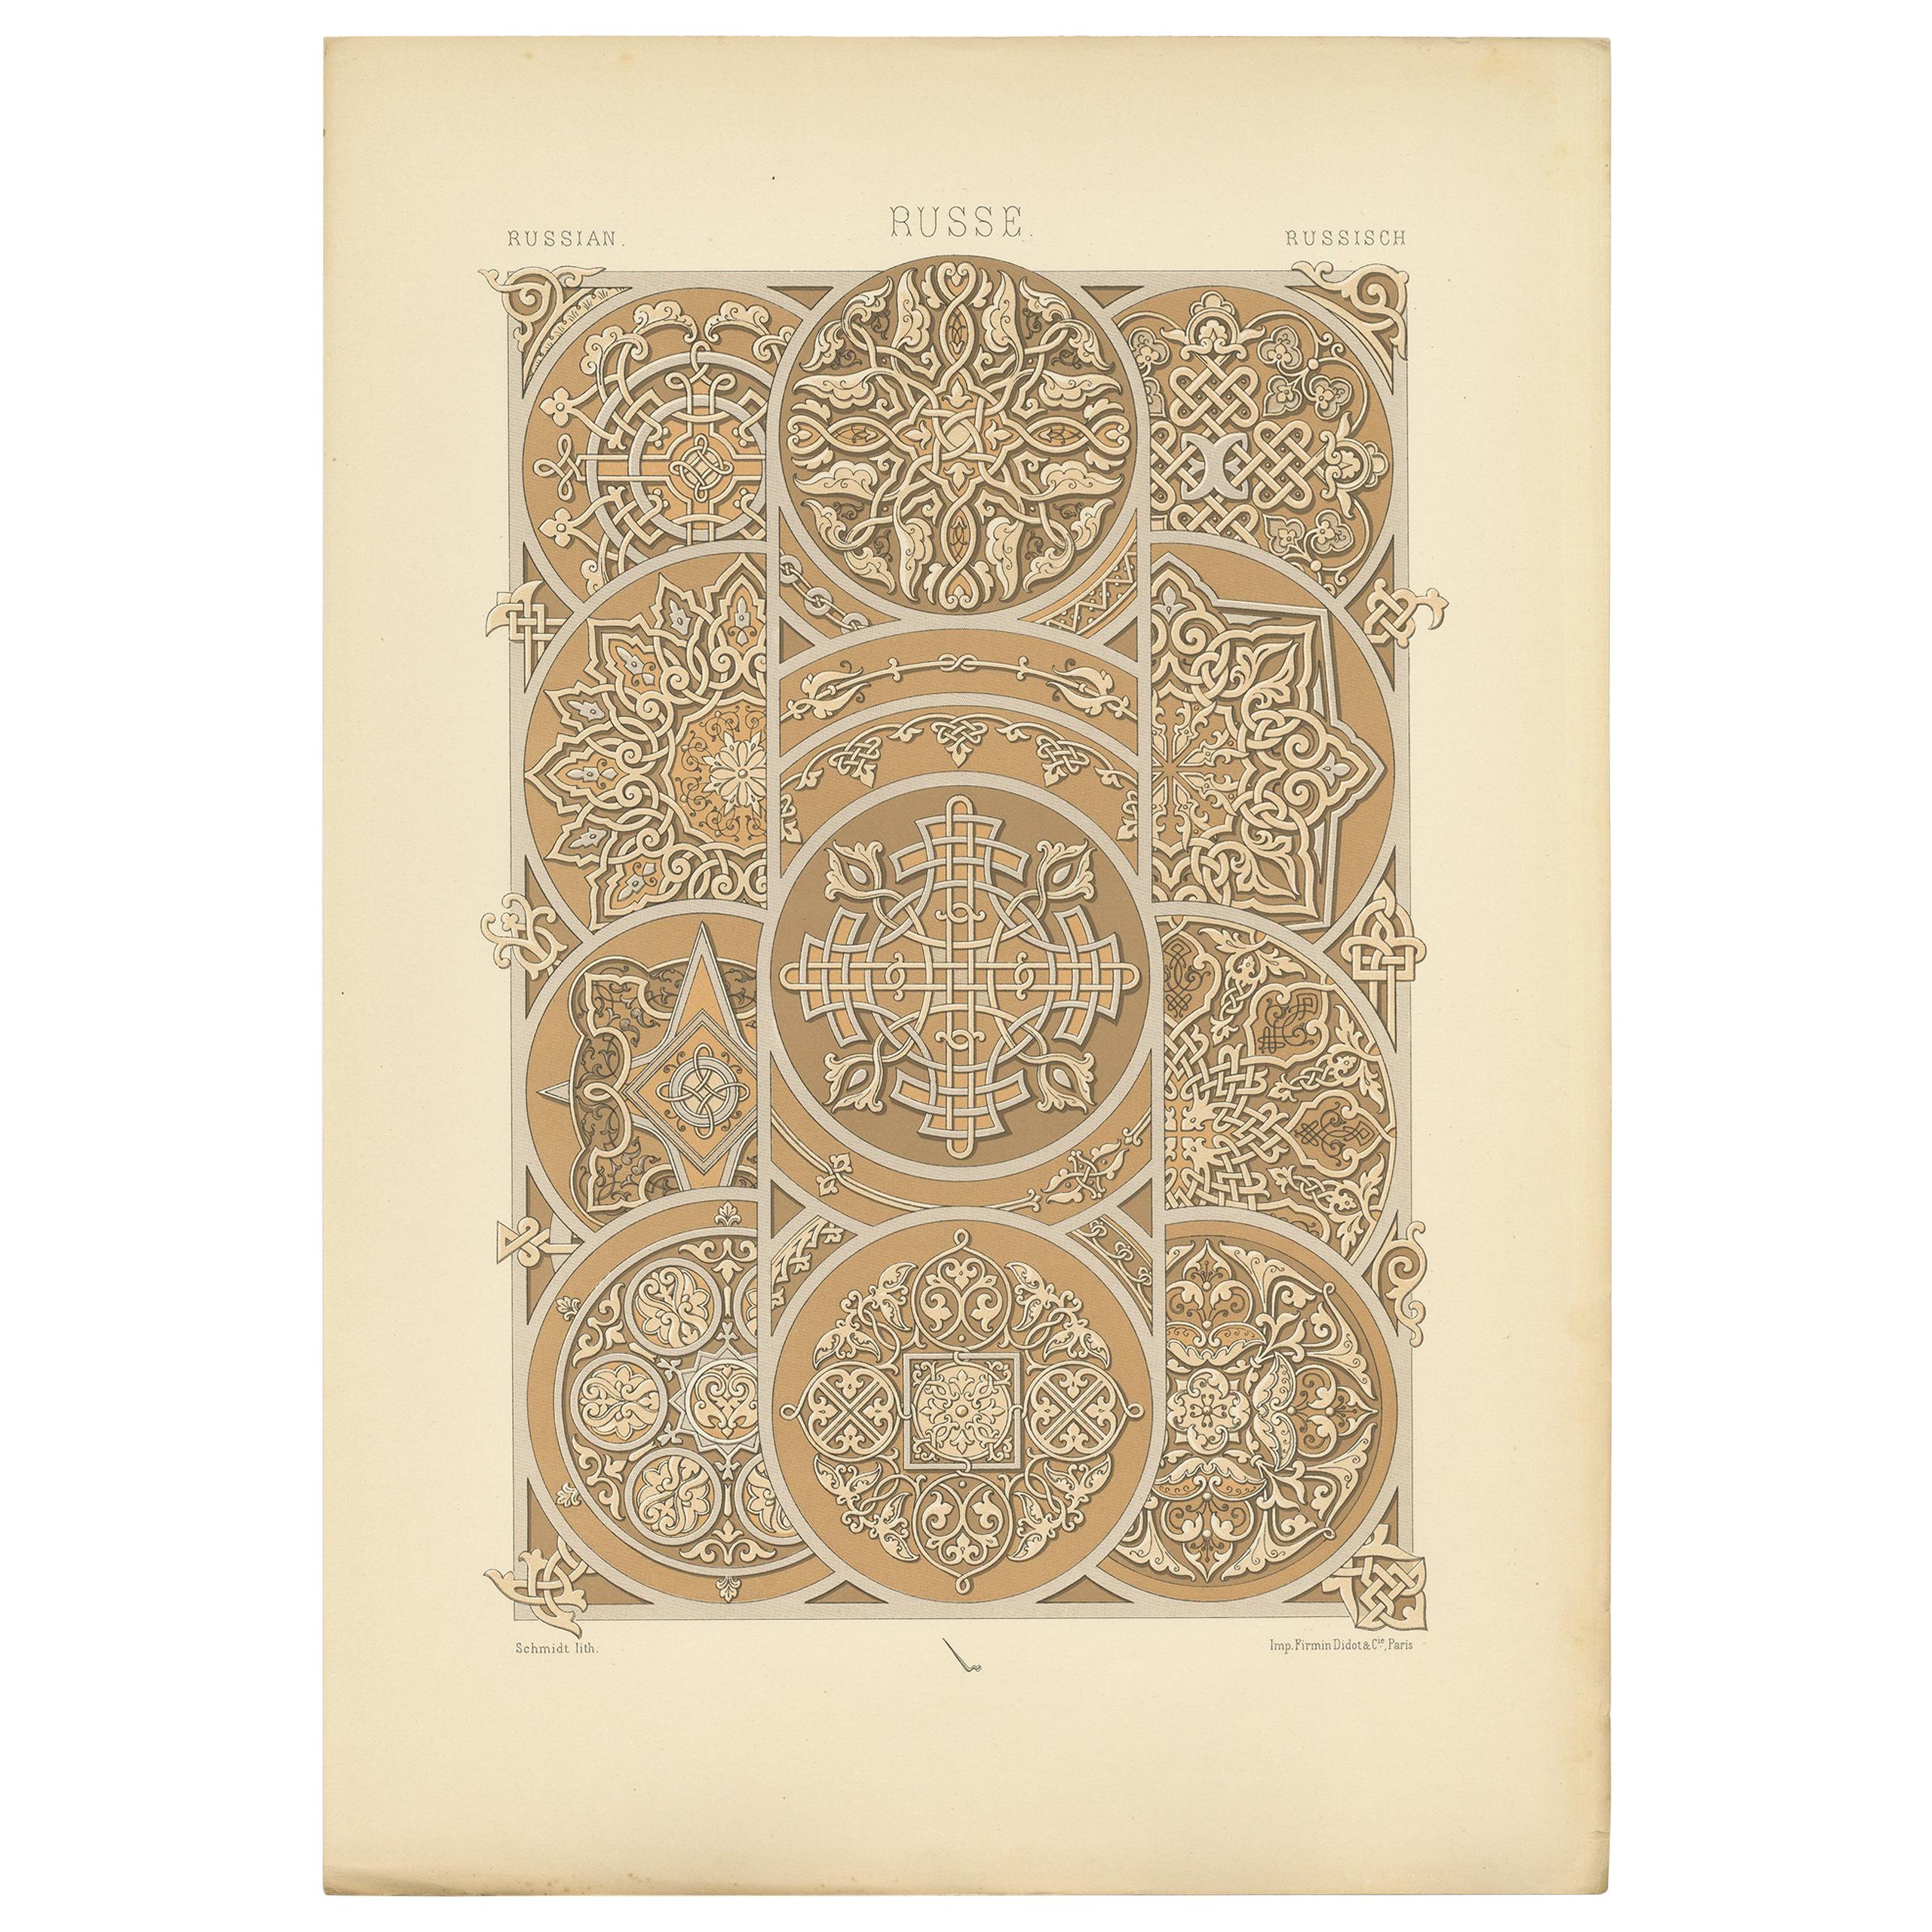 Pl. 67 Antique Print of Russian Motifs from Engraved and Chased Metal by Racinet For Sale